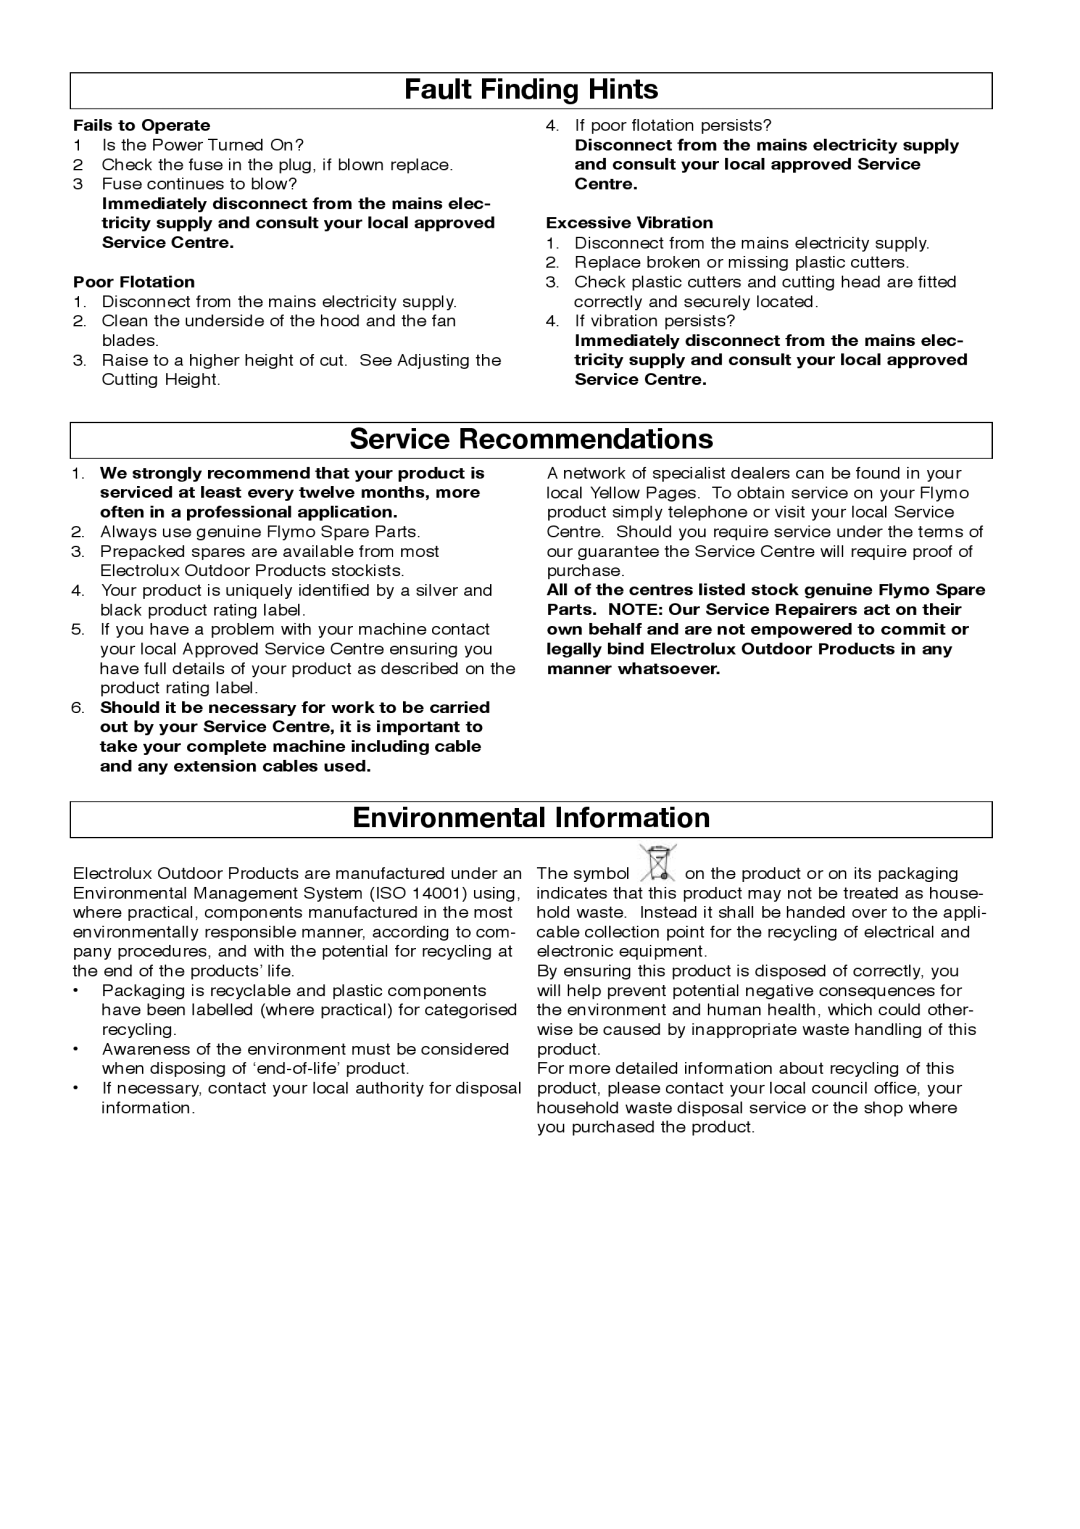 Flymo Minimo manual Fault Finding Hints, Service Recommendations, Environmental Information 